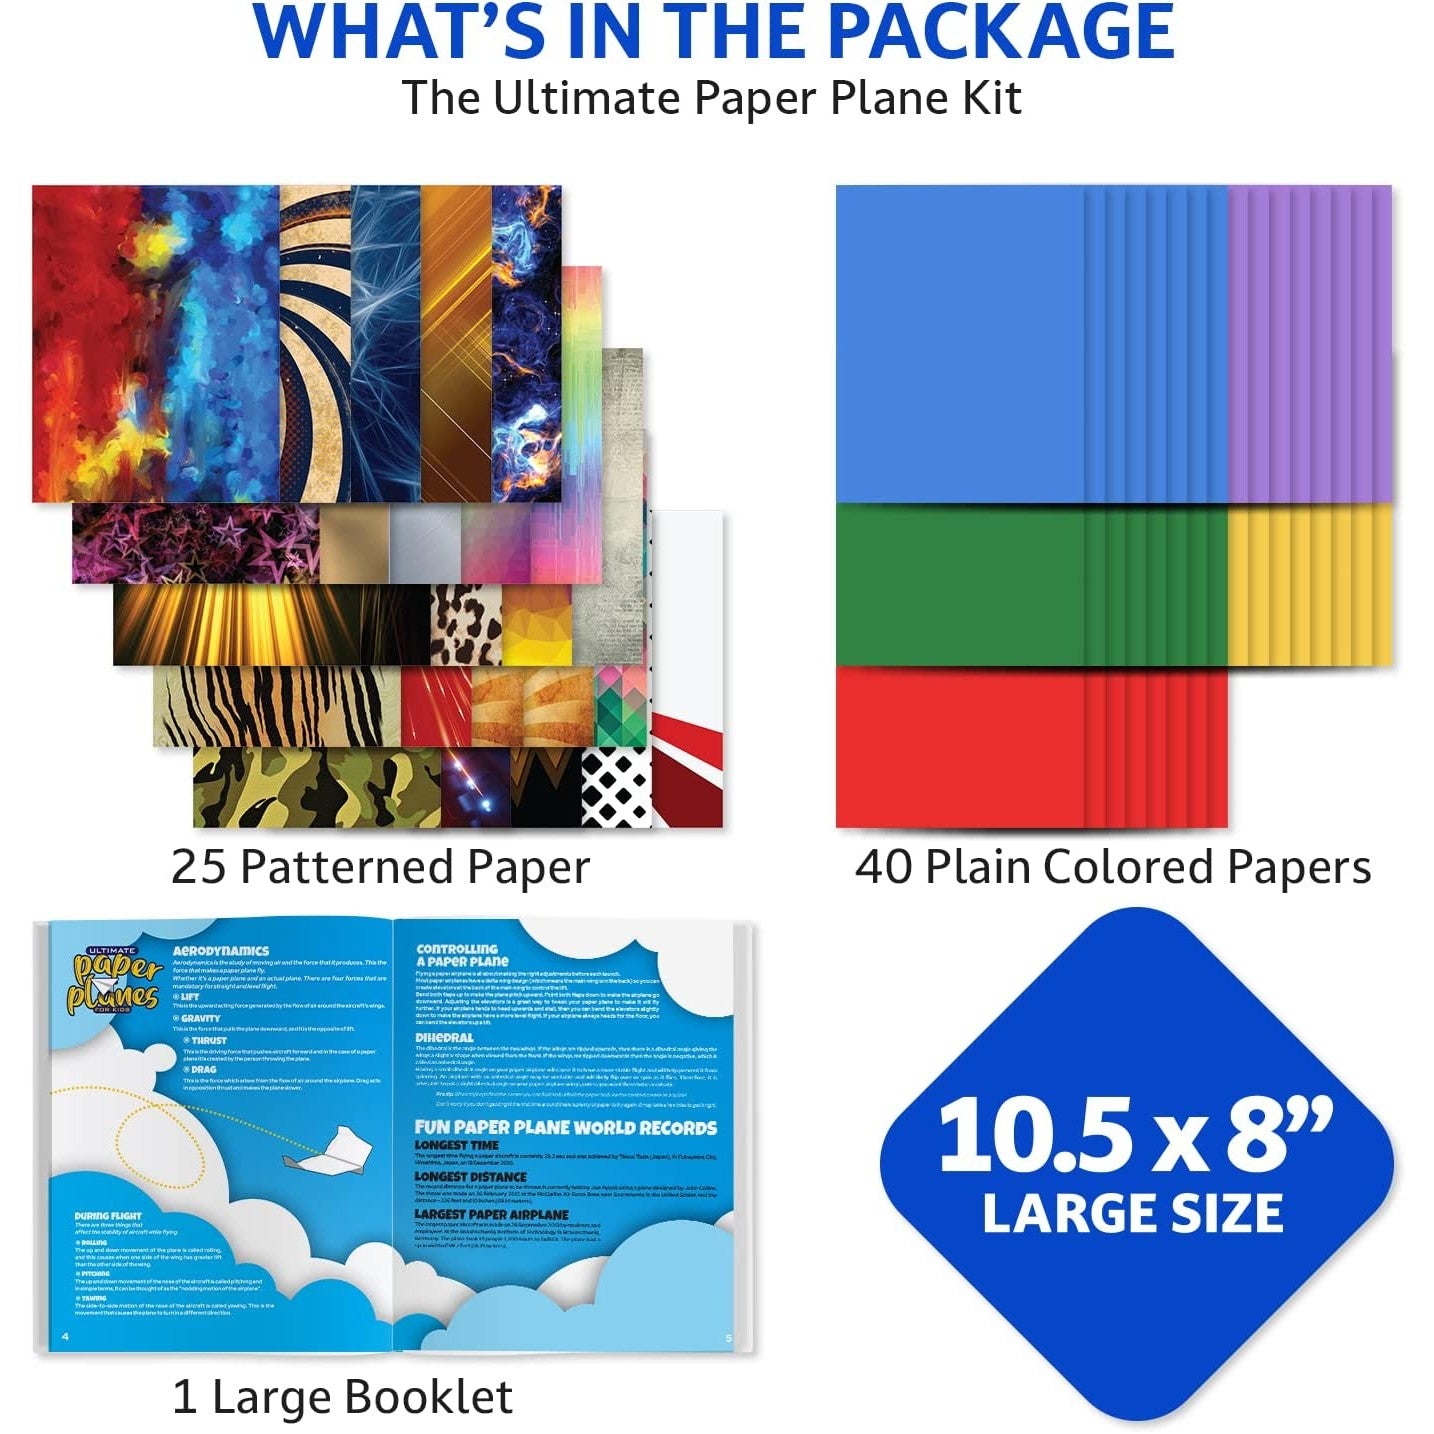 All the contents that are included with the paper plane creator kit. The kit includes 25 patterned paper sheets, 40 plain colored paper sheets and a large instruction booklet.